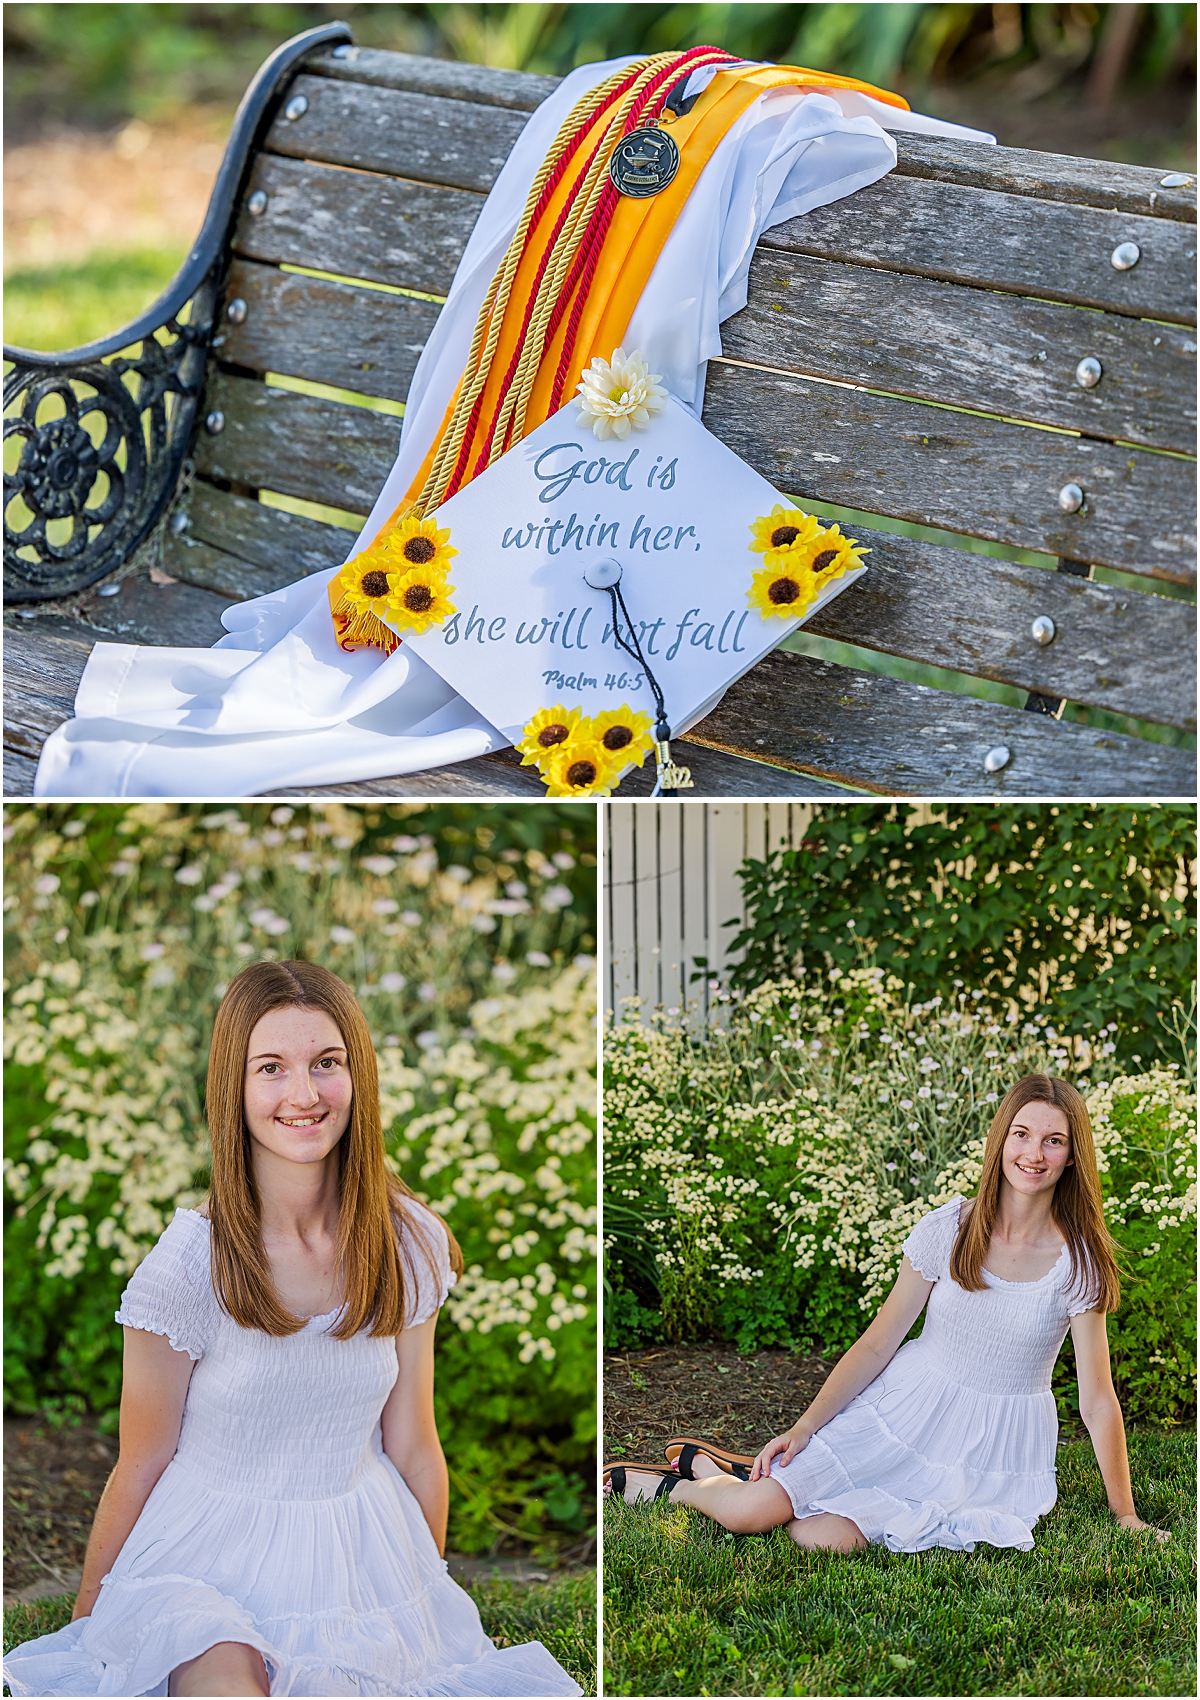 Jerica posing in a white dress among some flowers and a close up of her cap and gown